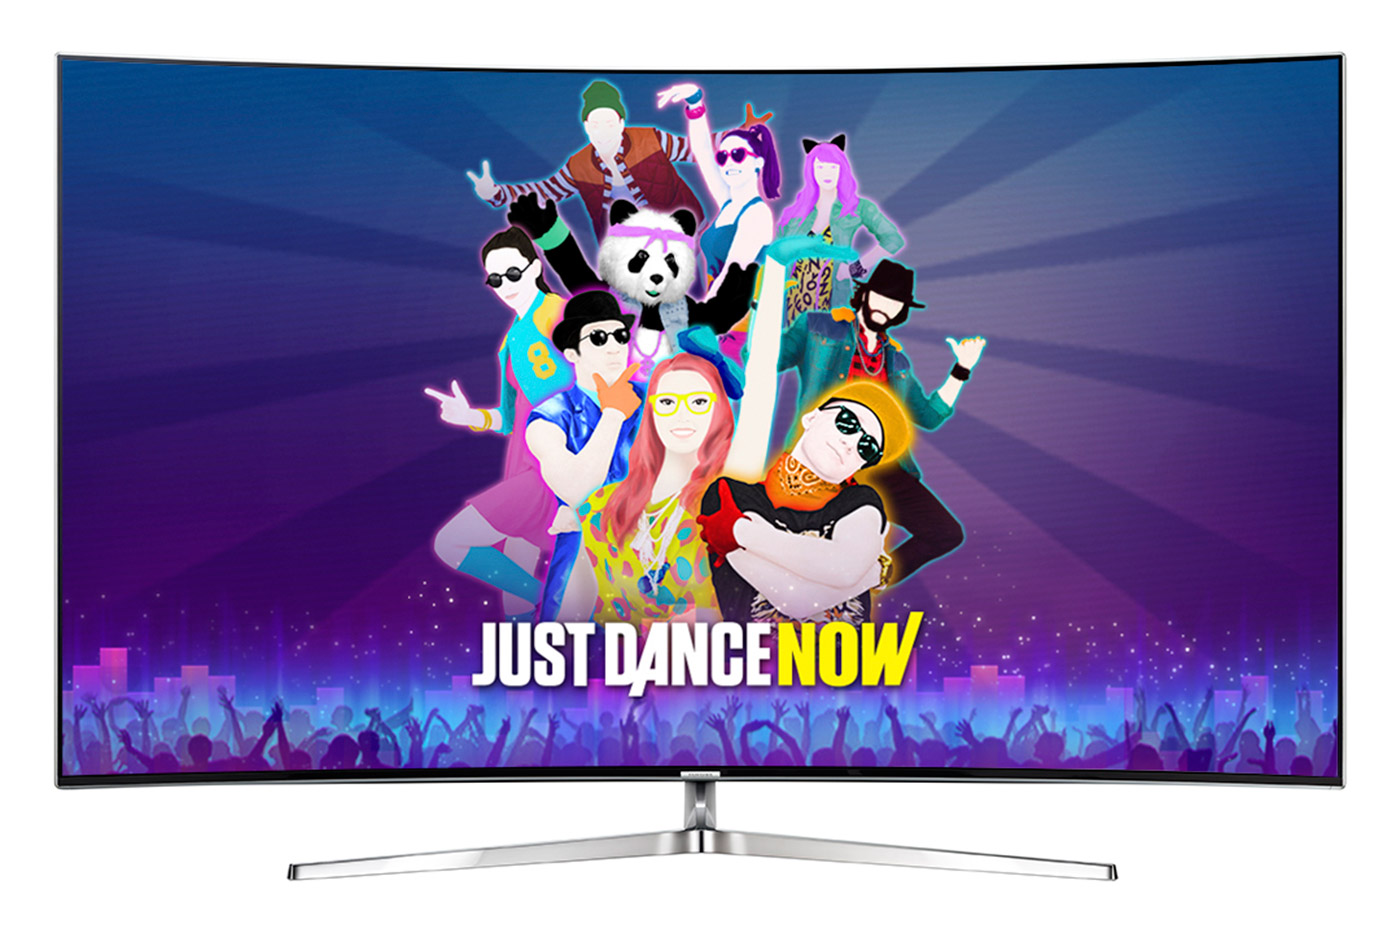 Samsung adds &#039;Just Dance Now&#039; to its smart TV hub